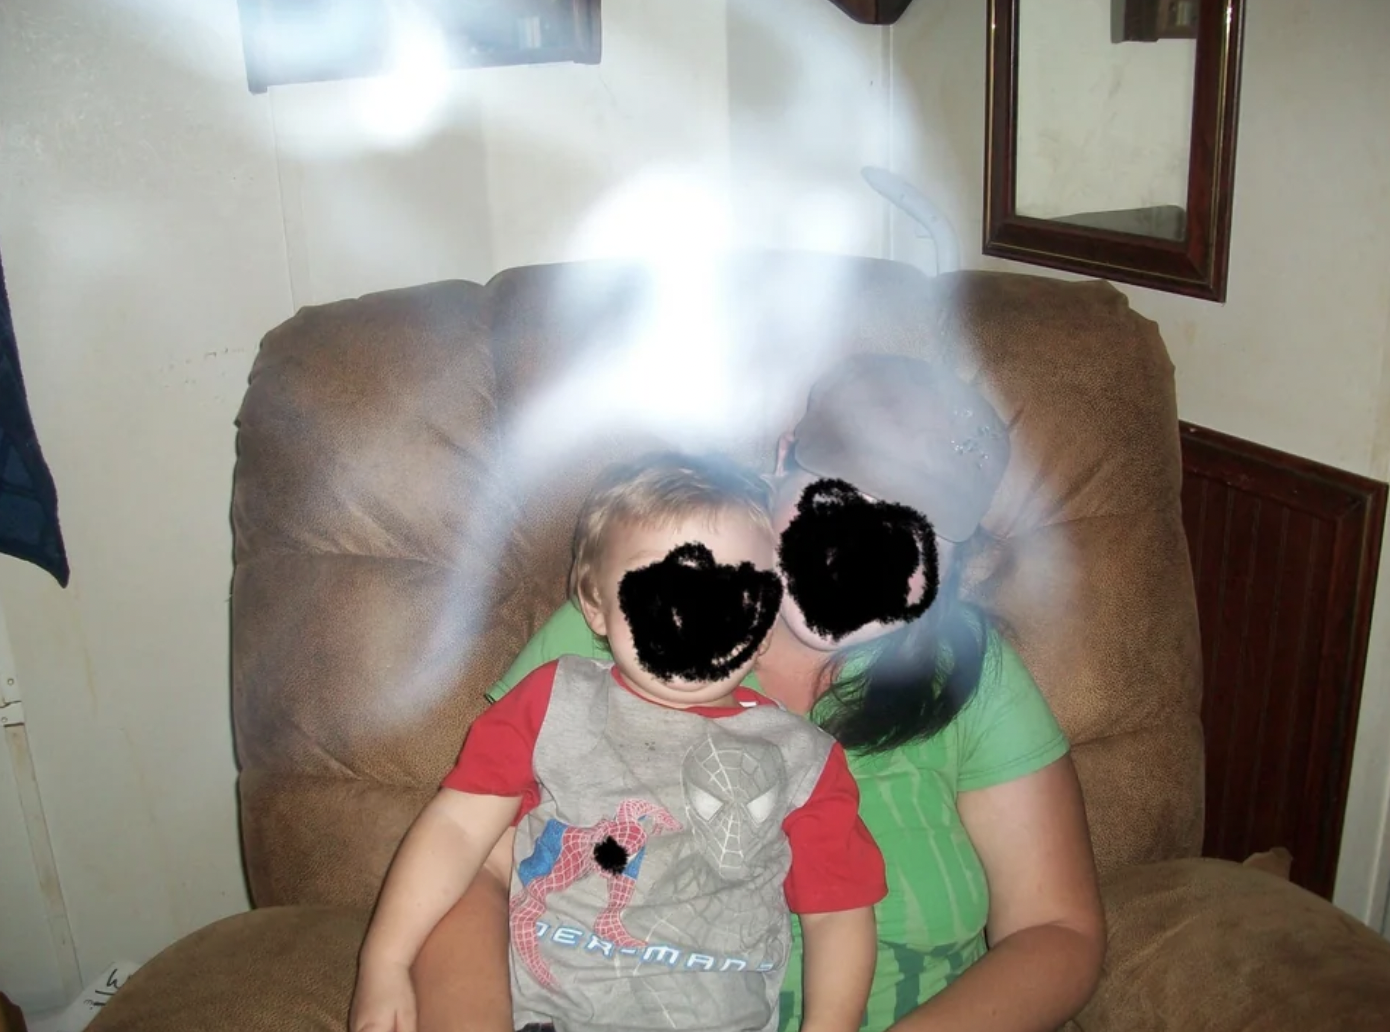 Photo of my cousin and her son taken after her brother's funeral. They all believe this was his ghost.